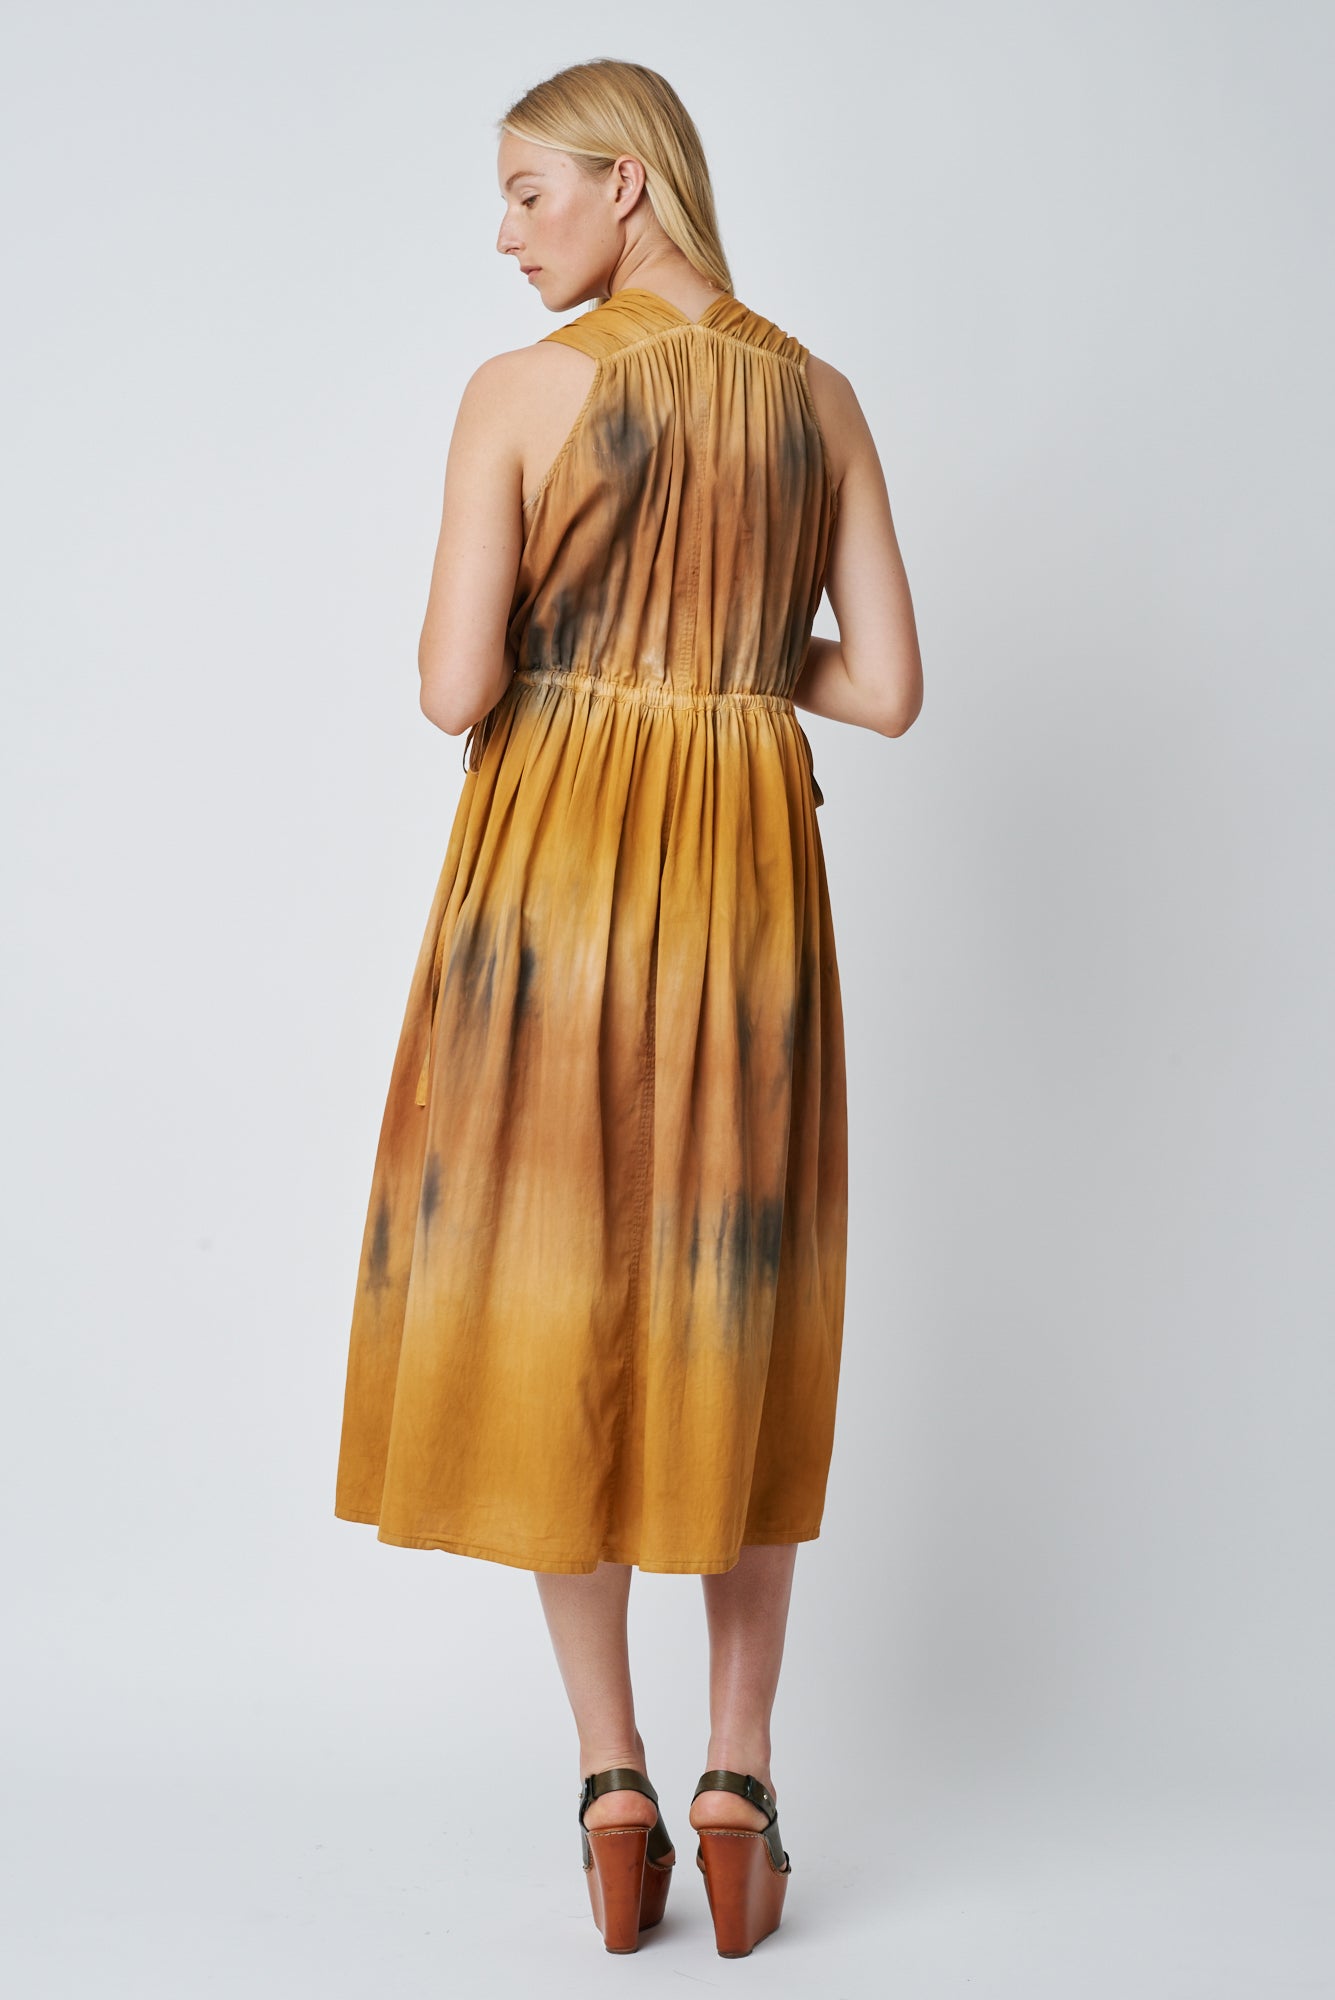 Bengal Tiger Tie Dye Antique Cotton Daydream Dress Full Back View